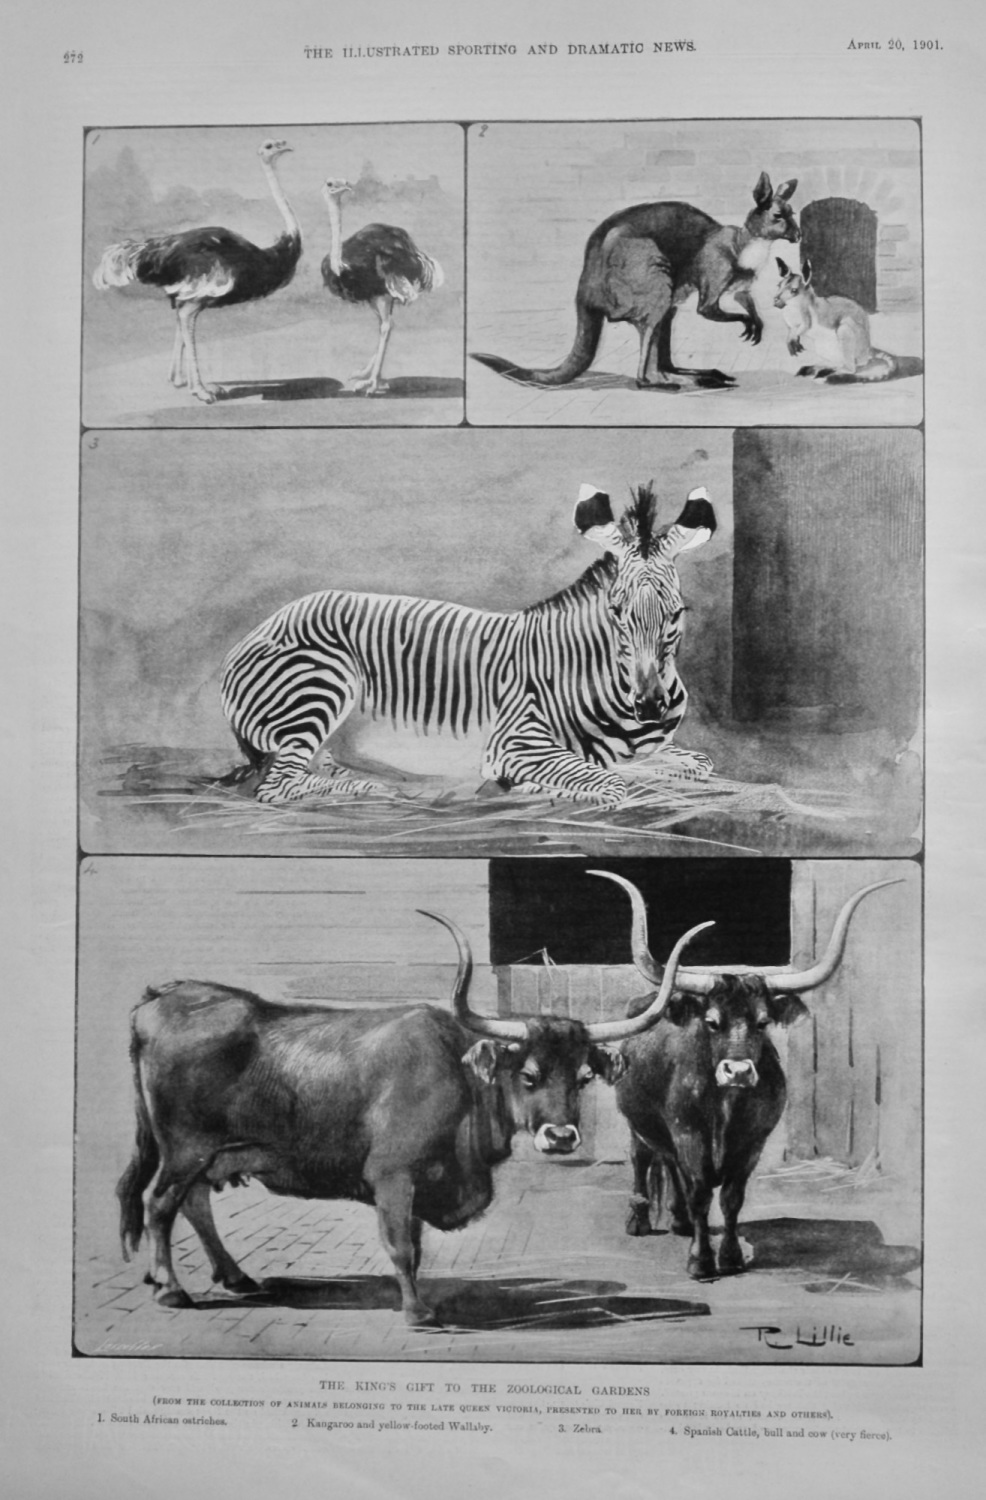 The King's Gift to the Zoological Gardens.  1901.